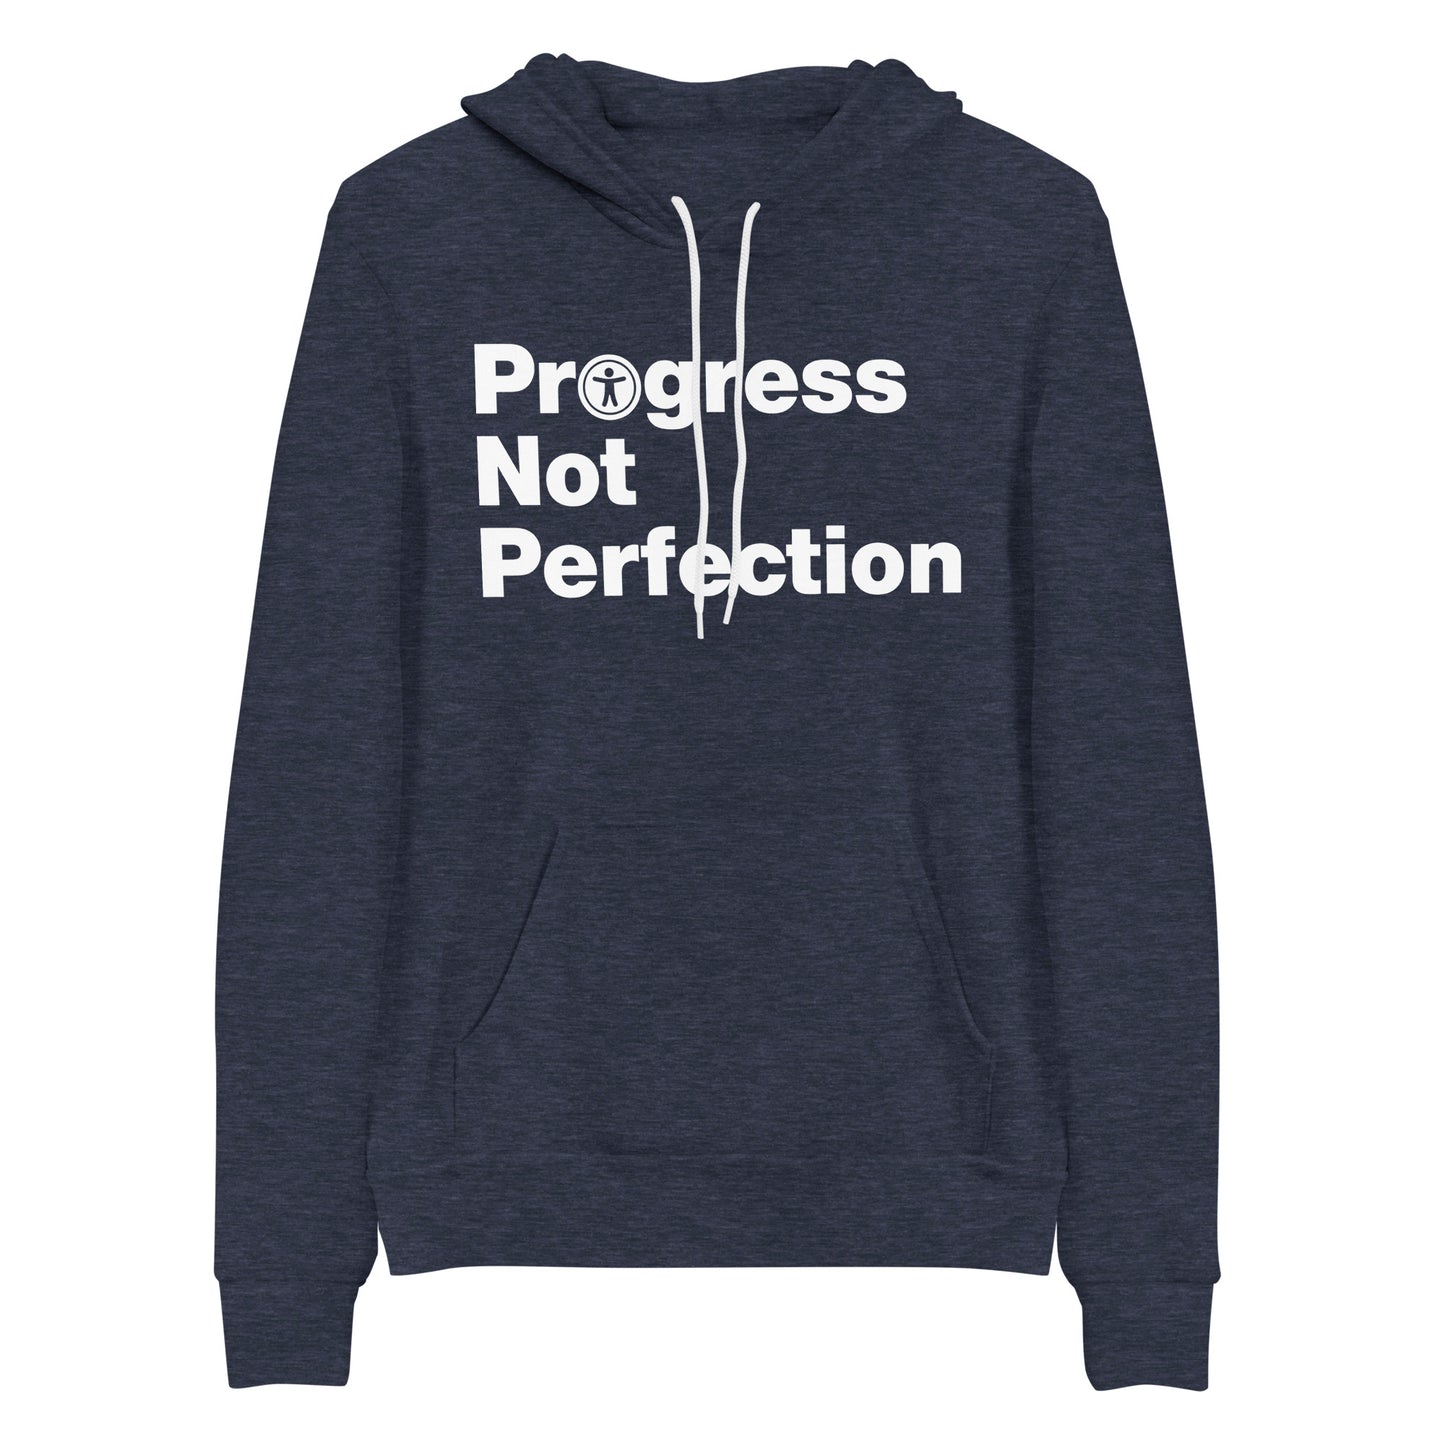 White, Progress Not Perfection, words, stacked, left aligned. 'O' in Progress is round universal icon, on front of heather navy blue hooded sweater.